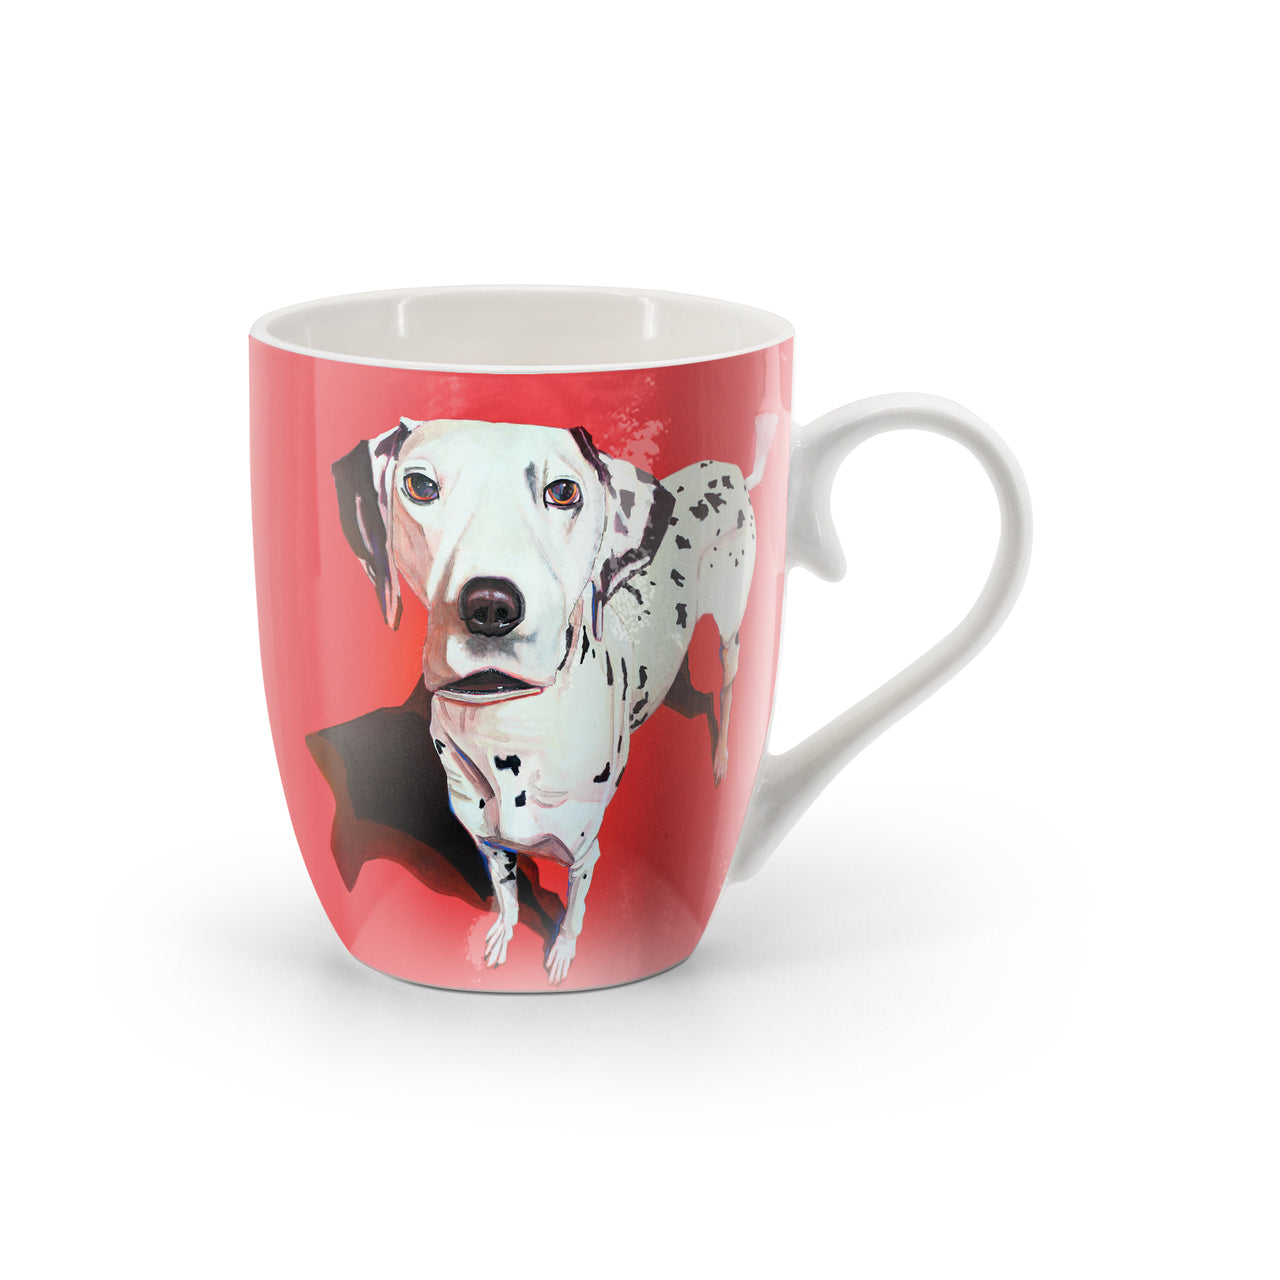 Eoin O'Connor Mutz Mug - Cruella   Tipperary Crystal are delighted to present the Mutz Collection Irish artist Eoin O'Connor.